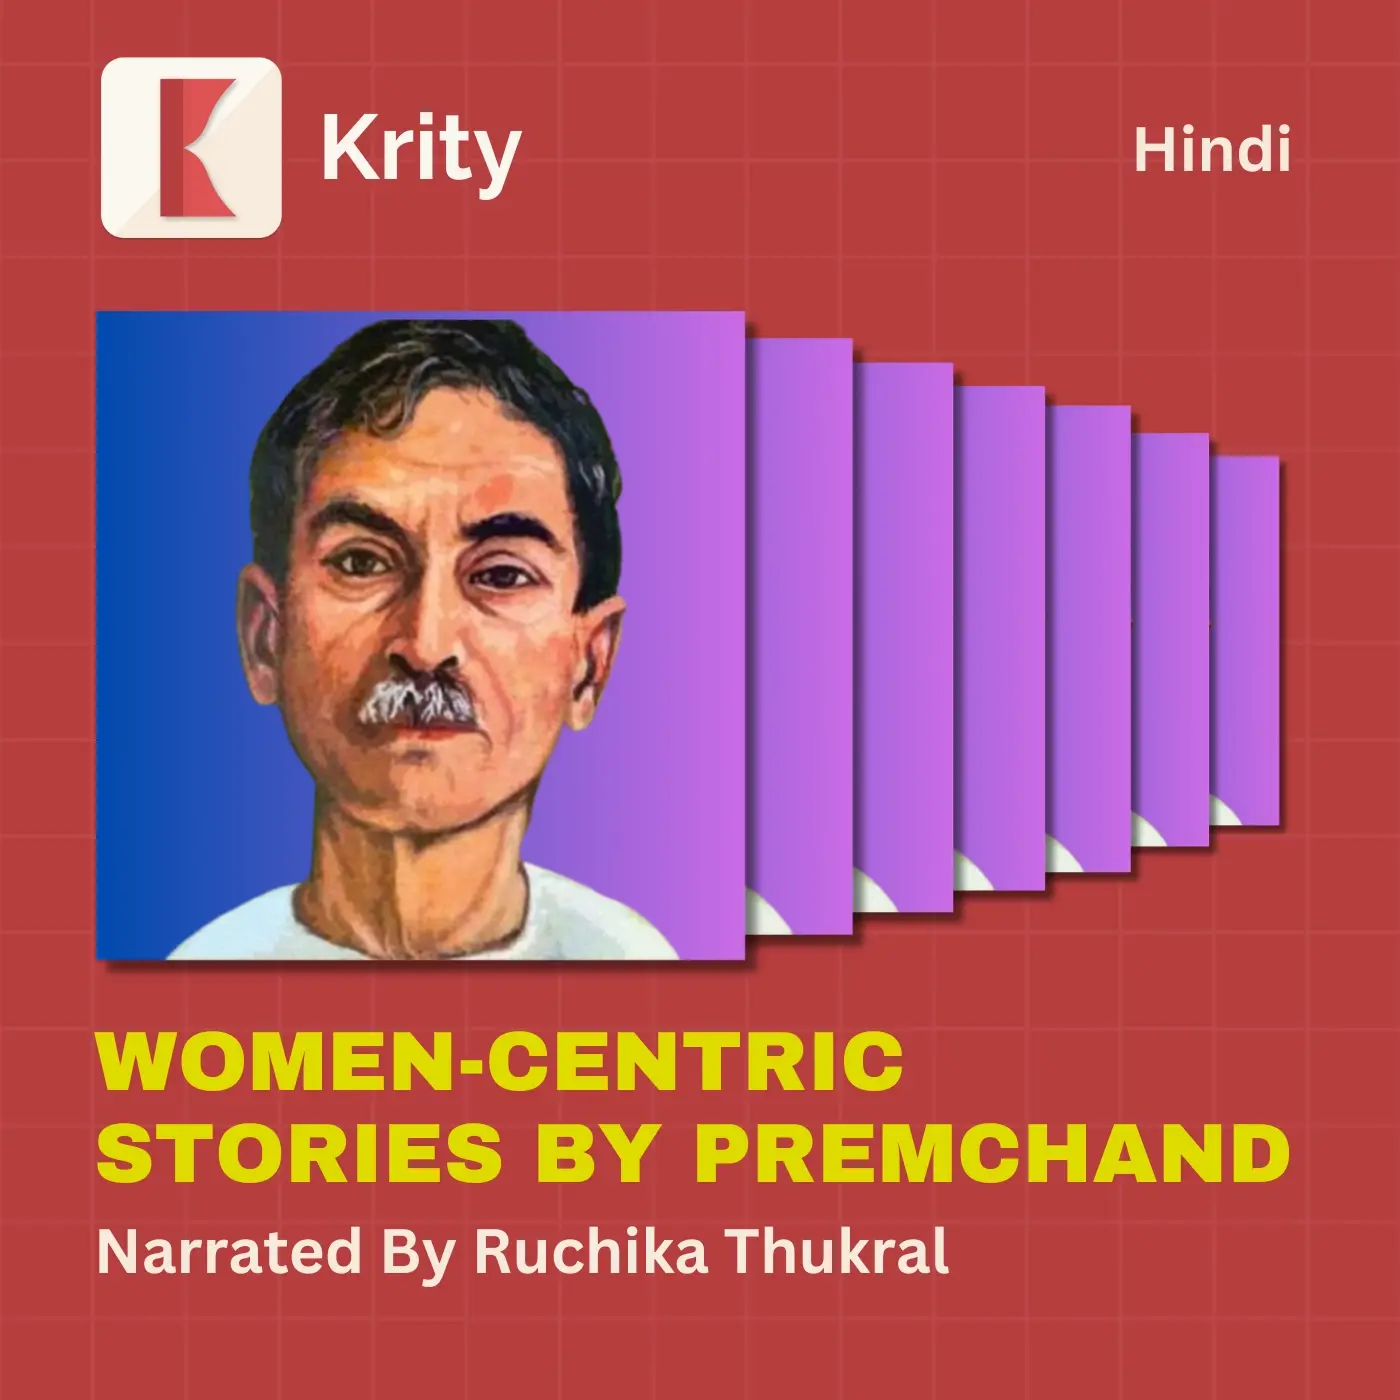 Women-centric Stories by Premchand